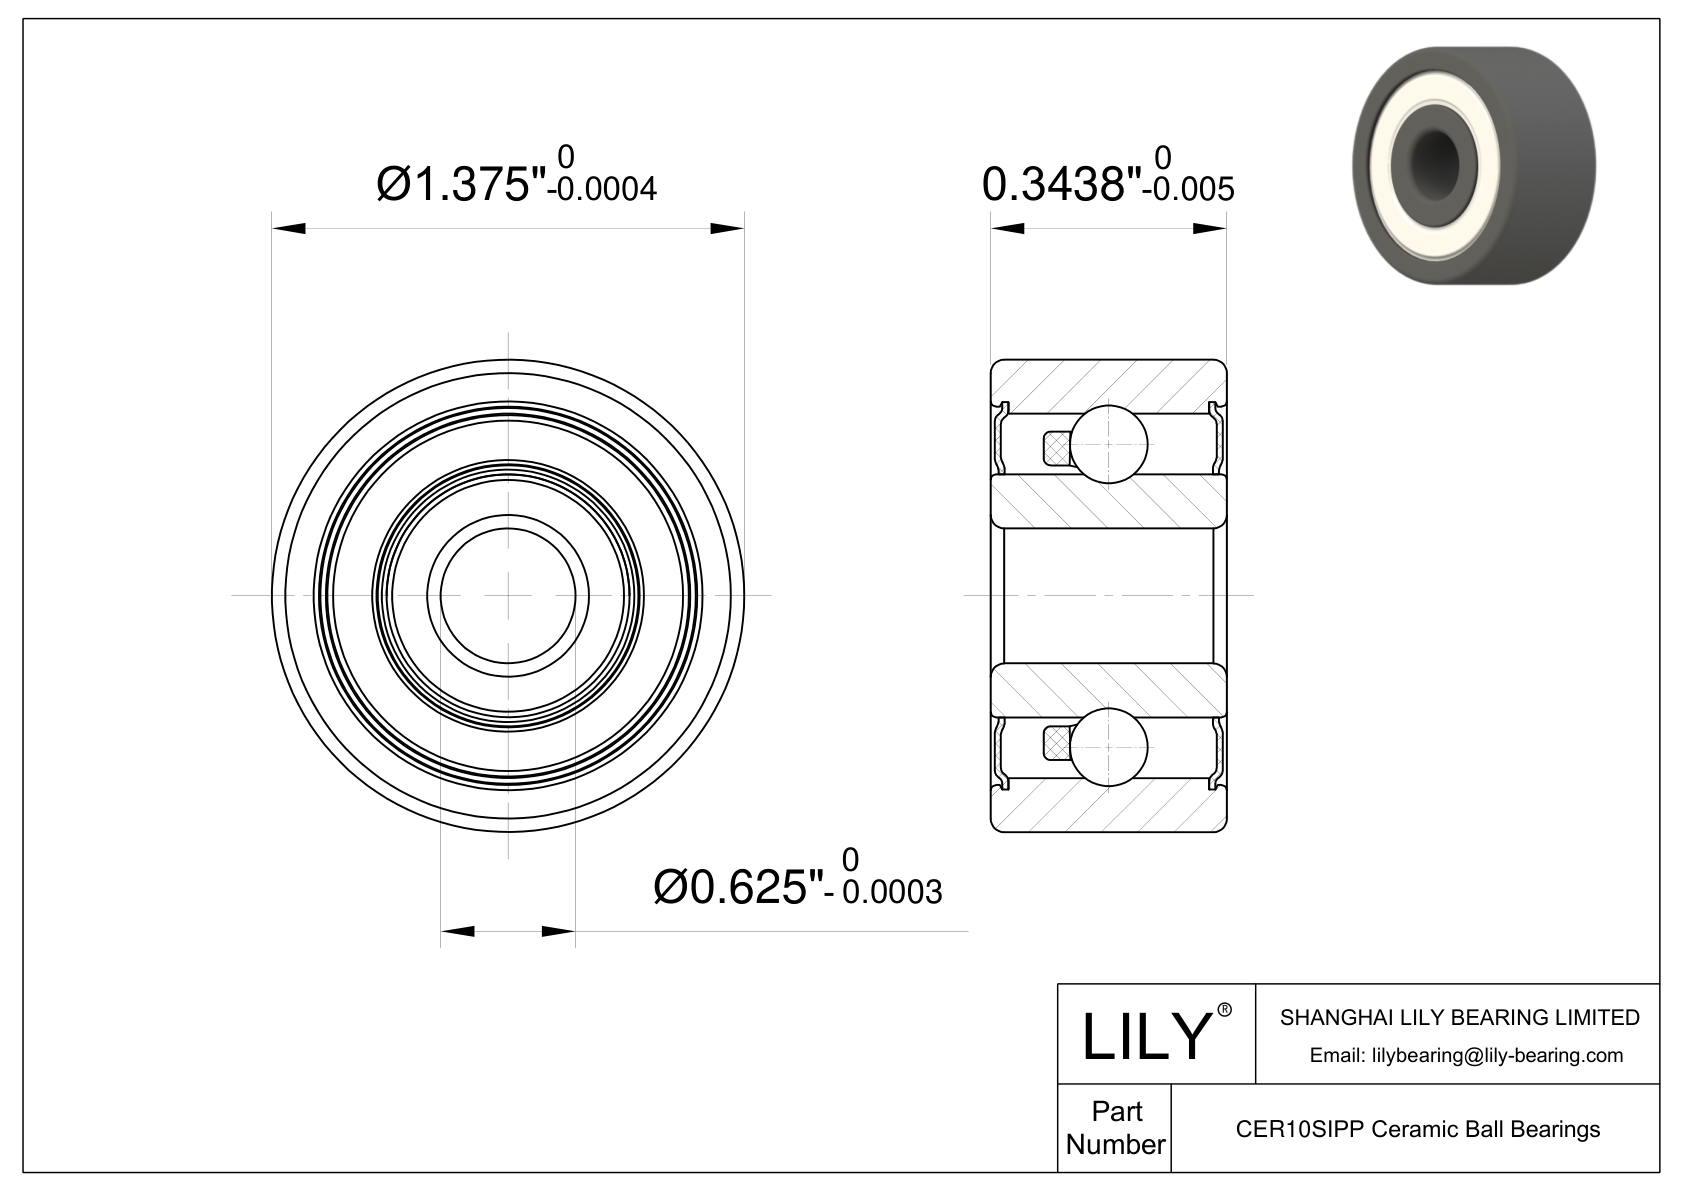 CESI R10 2RS Inch Size Silicon Nitride Ceramic Bearings cad drawing